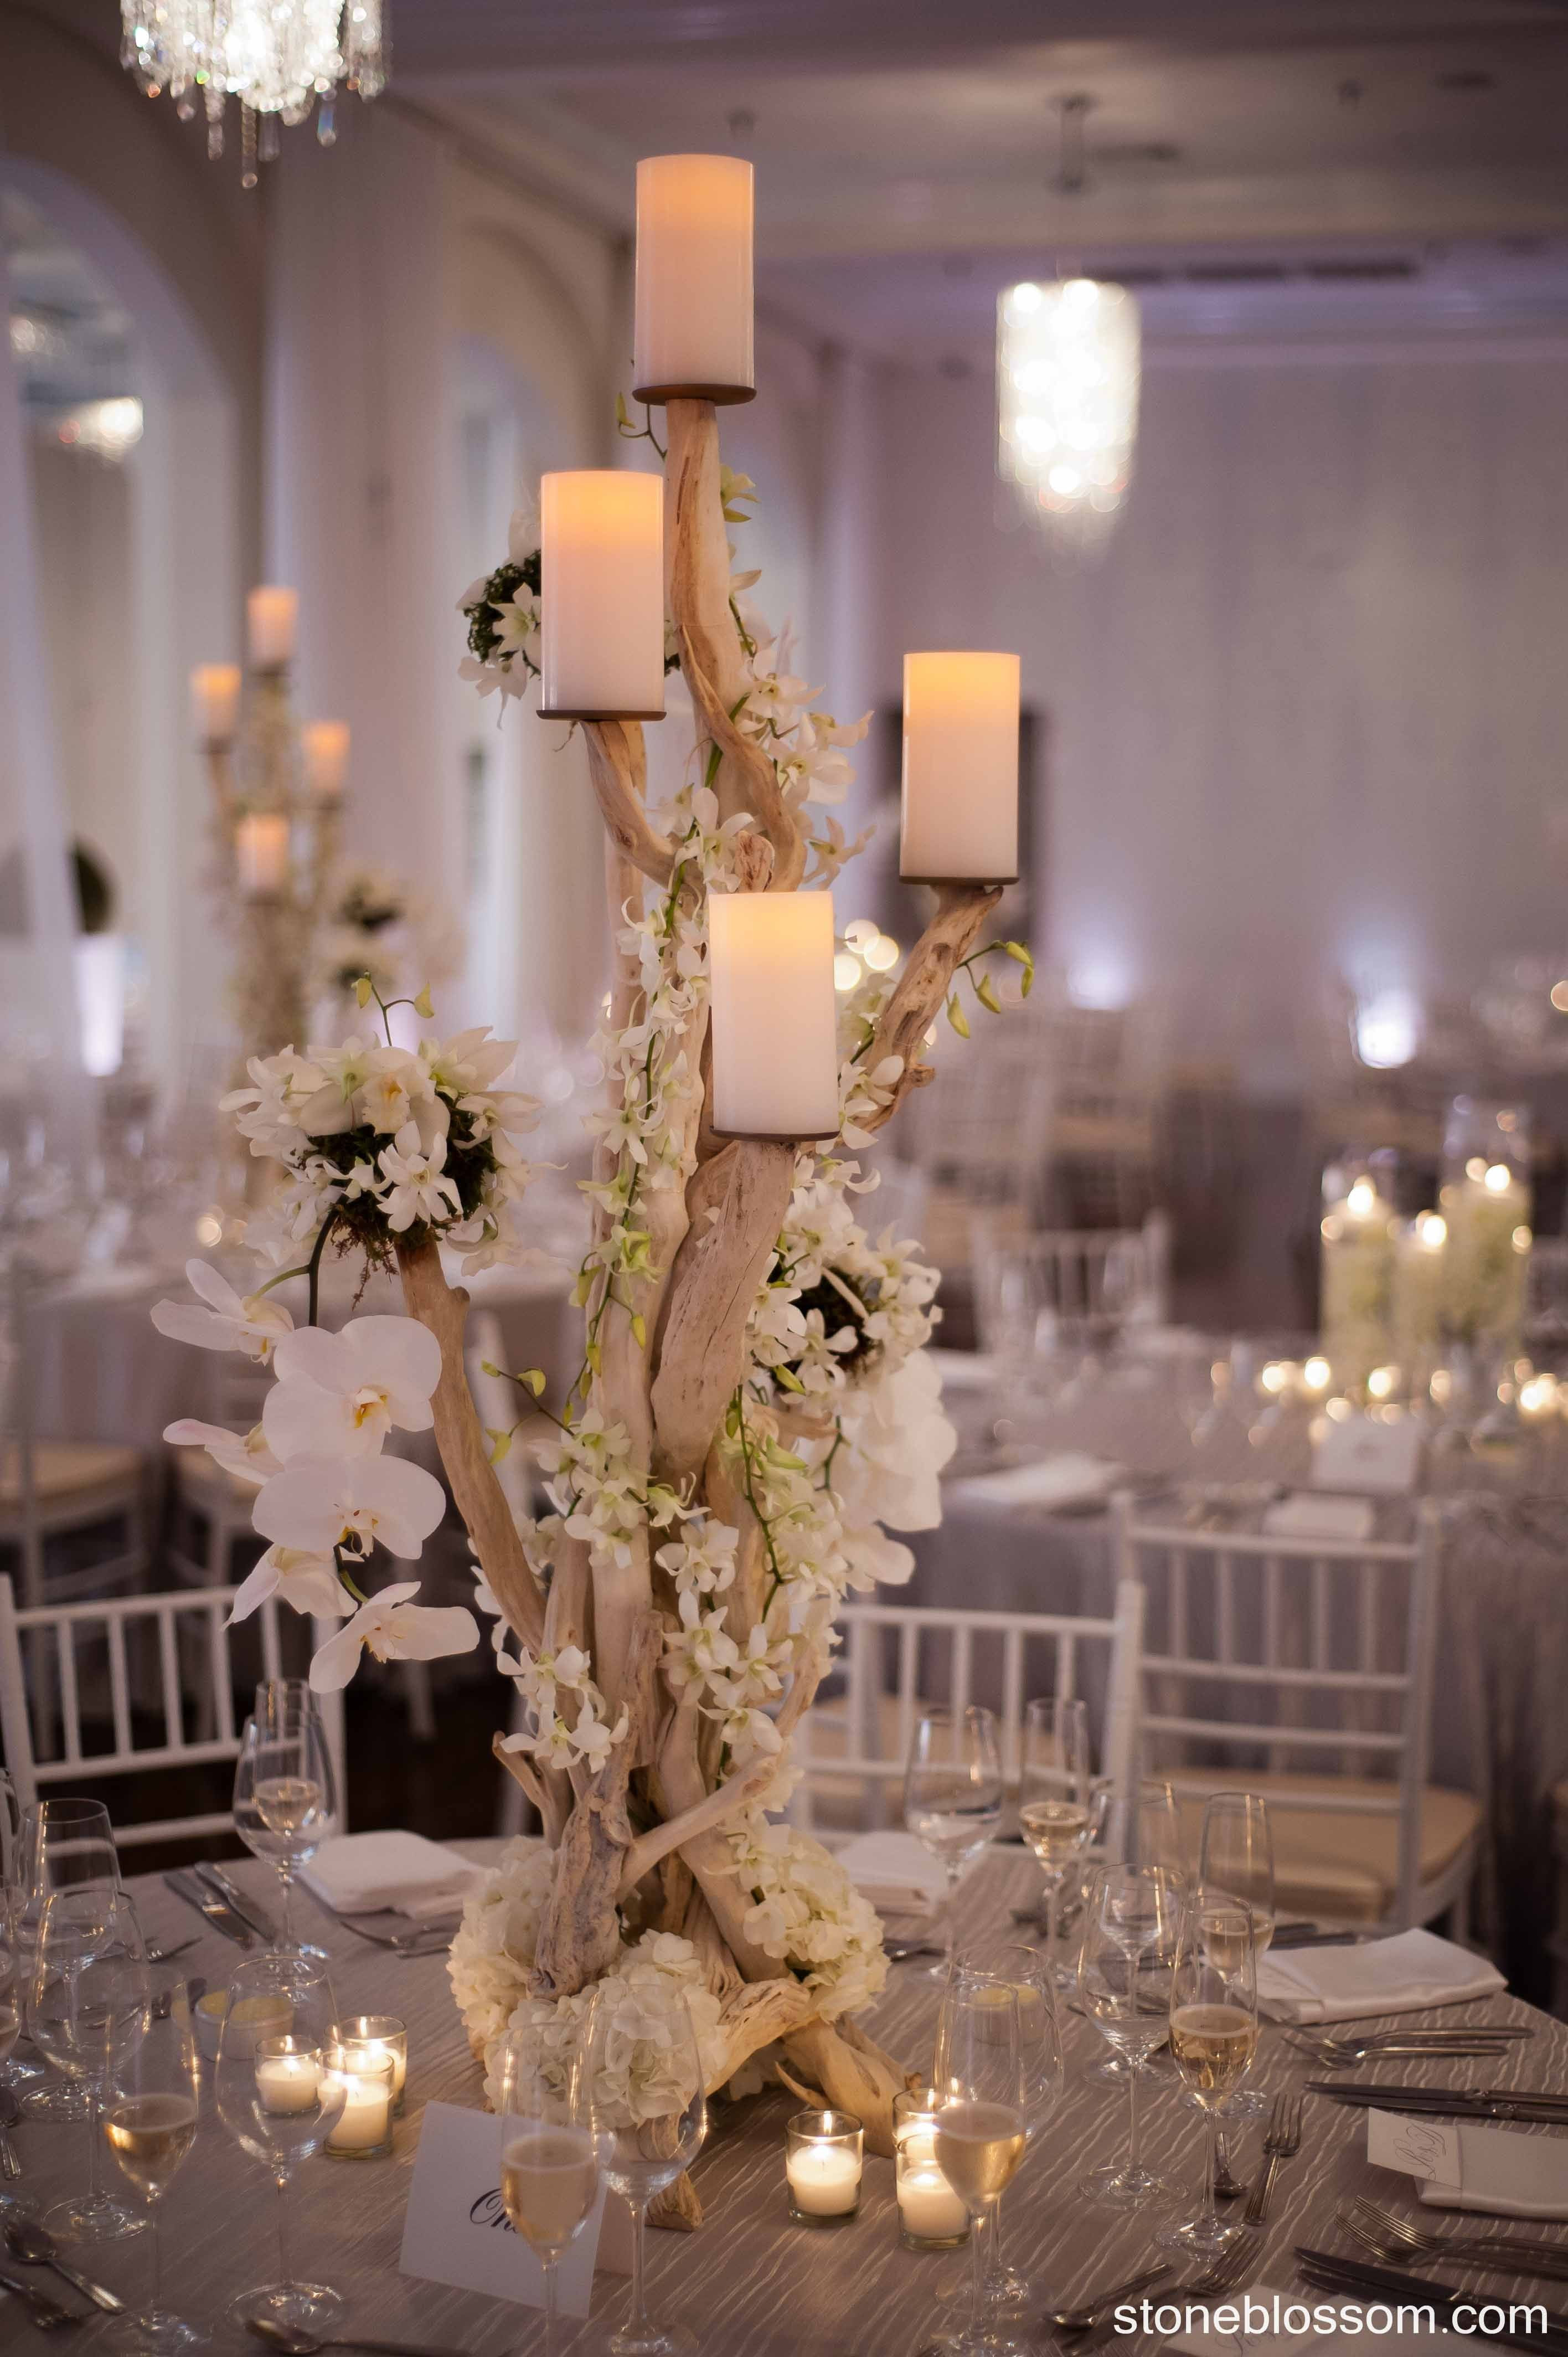 tall glass flower vases buy of decorative branches for weddings awesome tall vase centerpiece ideas inside decorative branches for weddings luxury floral amp event design by stoneblossom of decorative branches for weddings